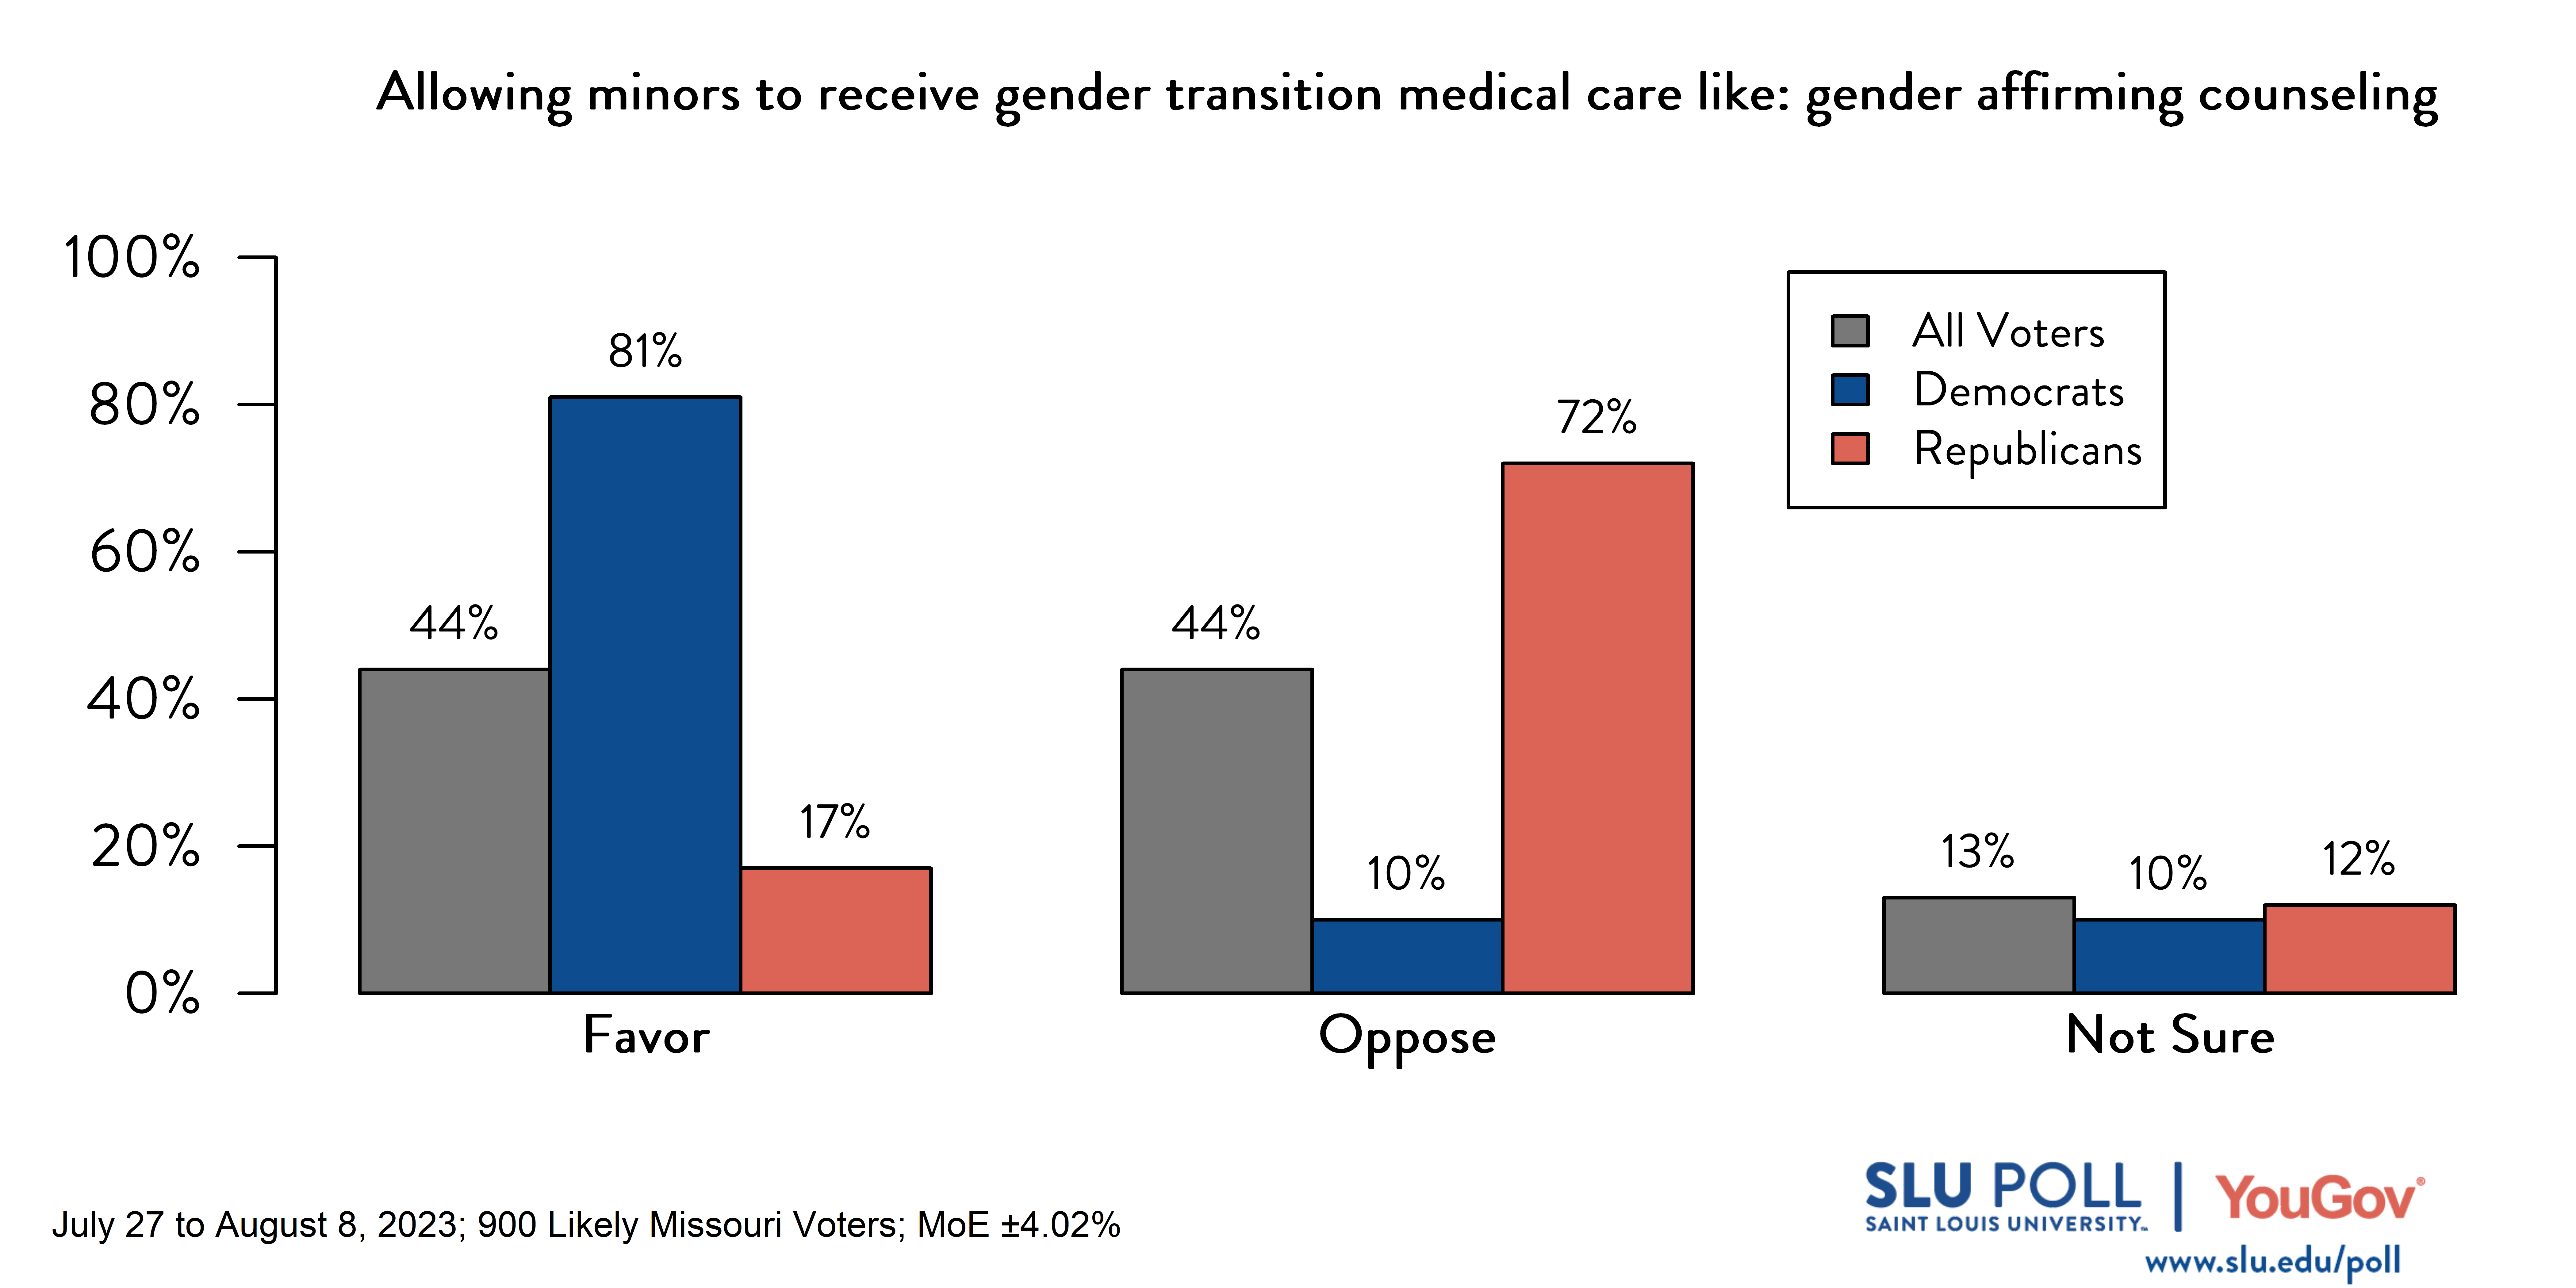 Likely voters' responses to 'Do you favor or oppose allowing someone younger than 18 to receive gender transition medical care like: gender affirming counseling?': 44% Favor, 44% Oppose, and 13% Not Sure. Democratic voters' responses: ' 81% Favor, 10% Oppose, and 10% Not Sure. Republican voters' responses: 17% Favor, 72% Oppose, and 12% Not Sure. 